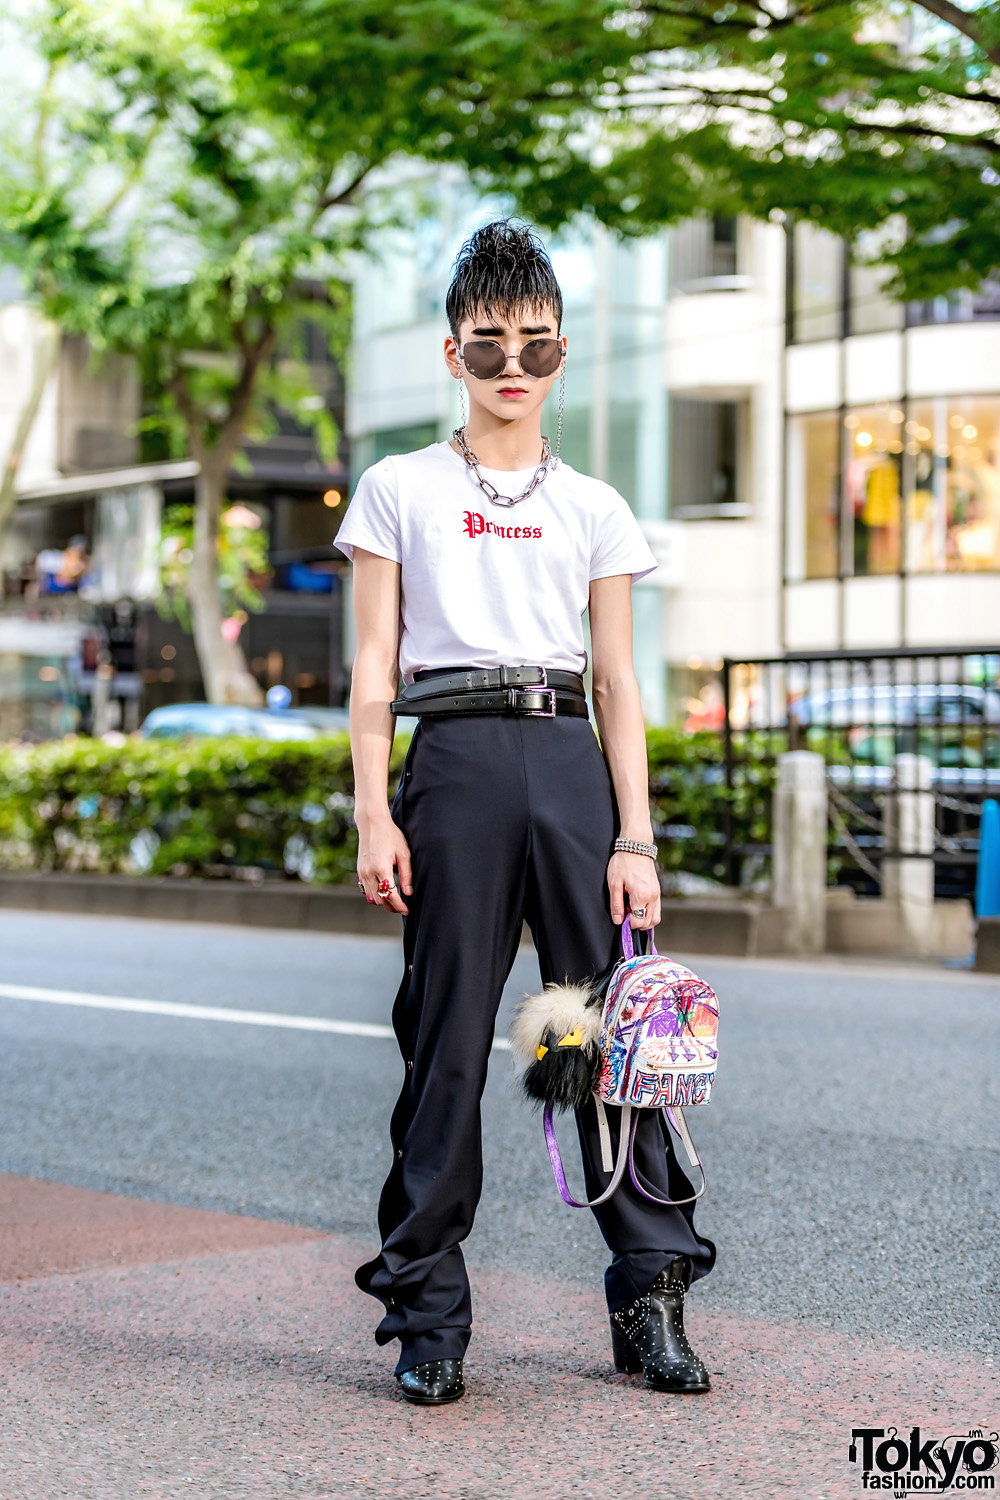 Monochrome Streetwear Style in Harajuku w/ Forever21 Statement T-Shirt, Studded Ankle Boots, Backpack & Keisuke Yoshida Pants